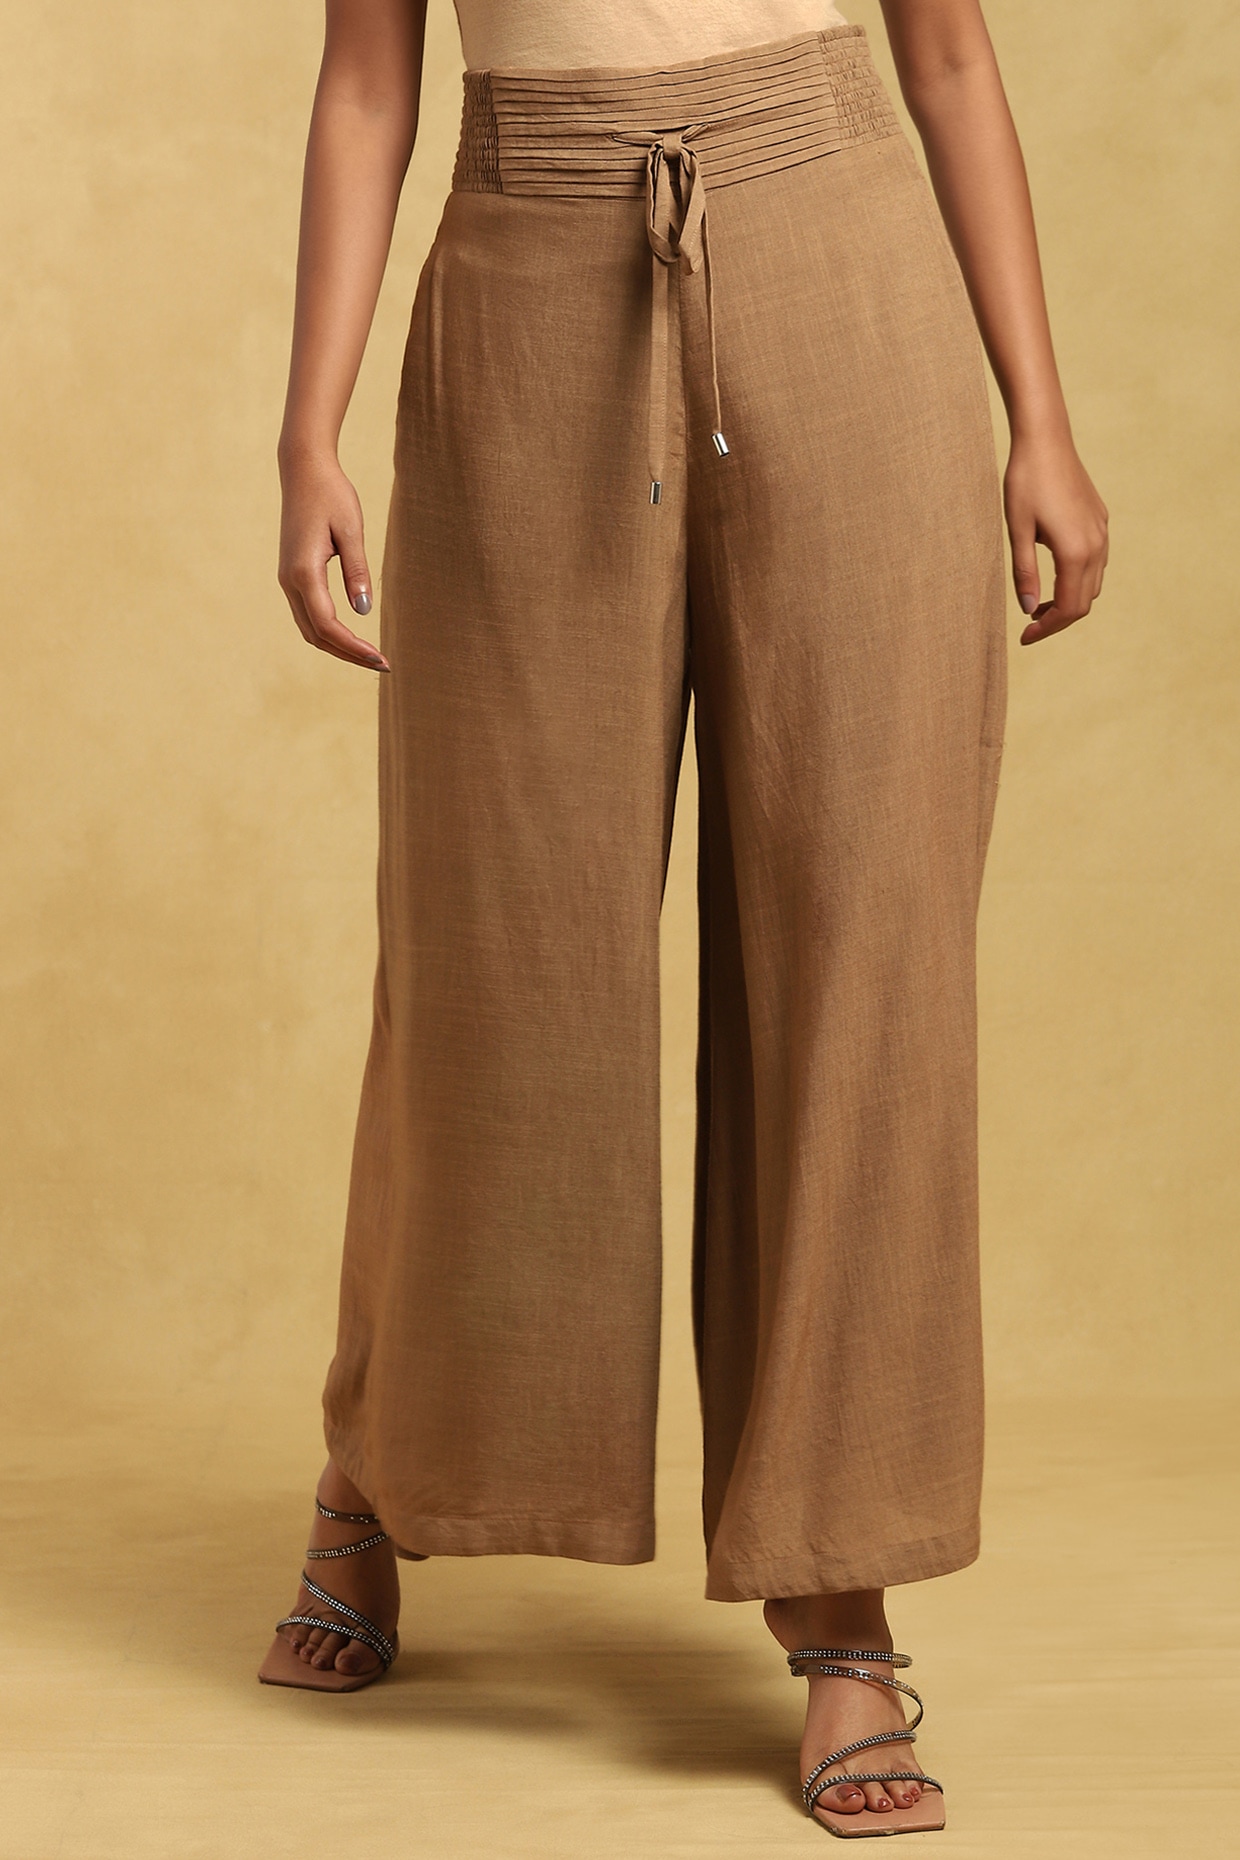 Buy Loose linen pant - Burned Olive - from KnowledgeCotton Apparel®